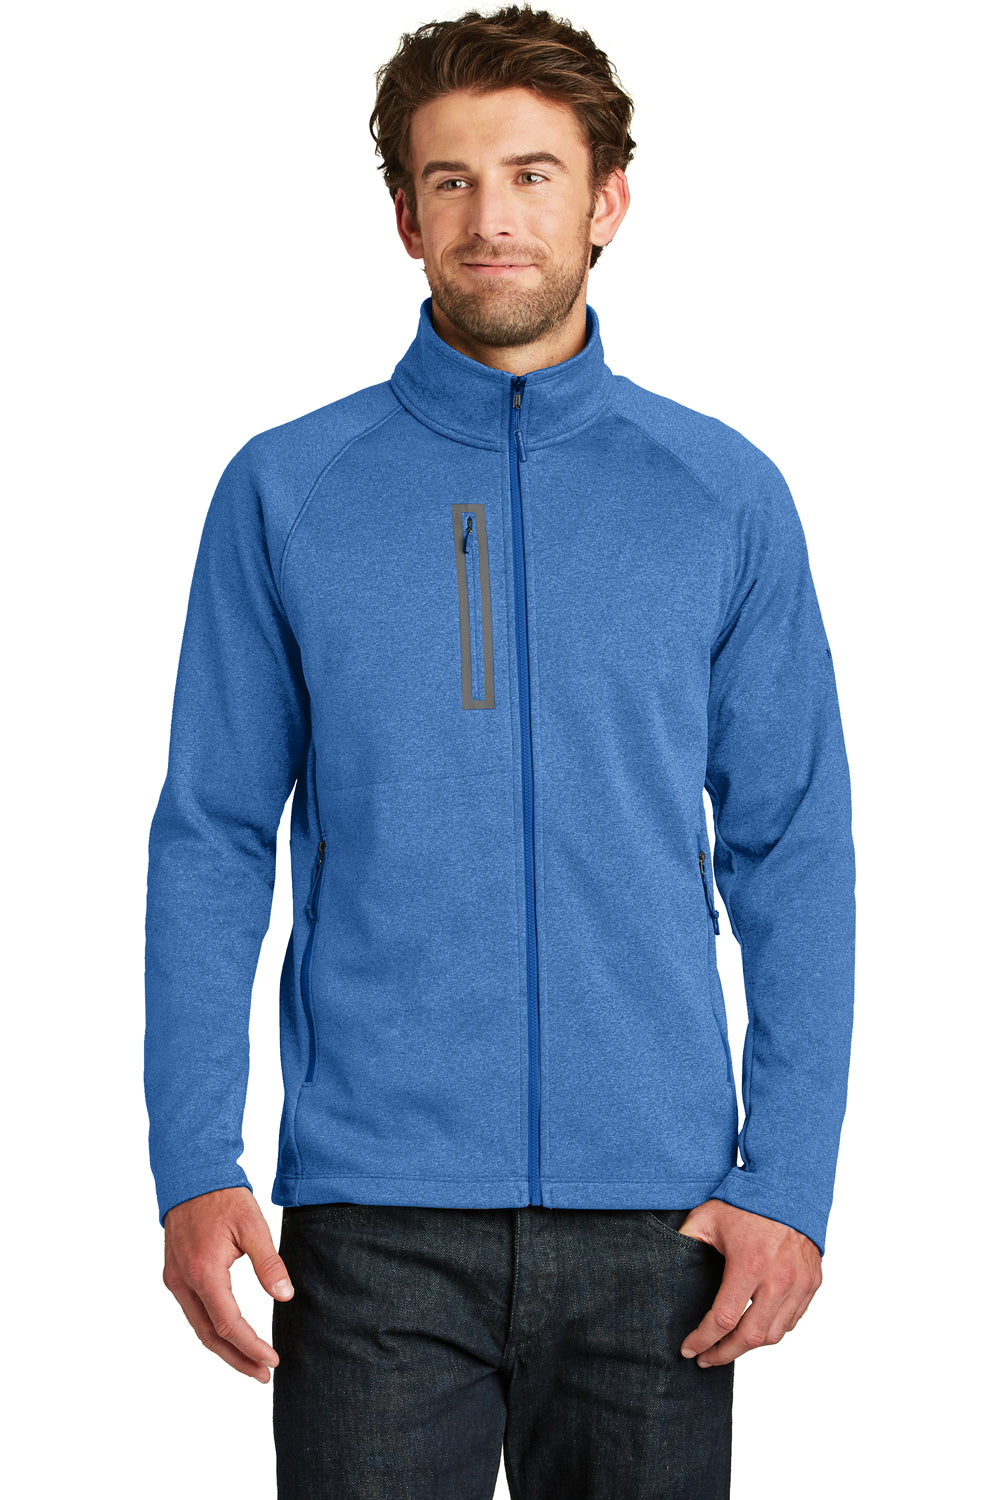 The North Face NF0A3LH9 Mens Canyon Flats Full Zip Fleece Jacket Heather Monster Blue Front